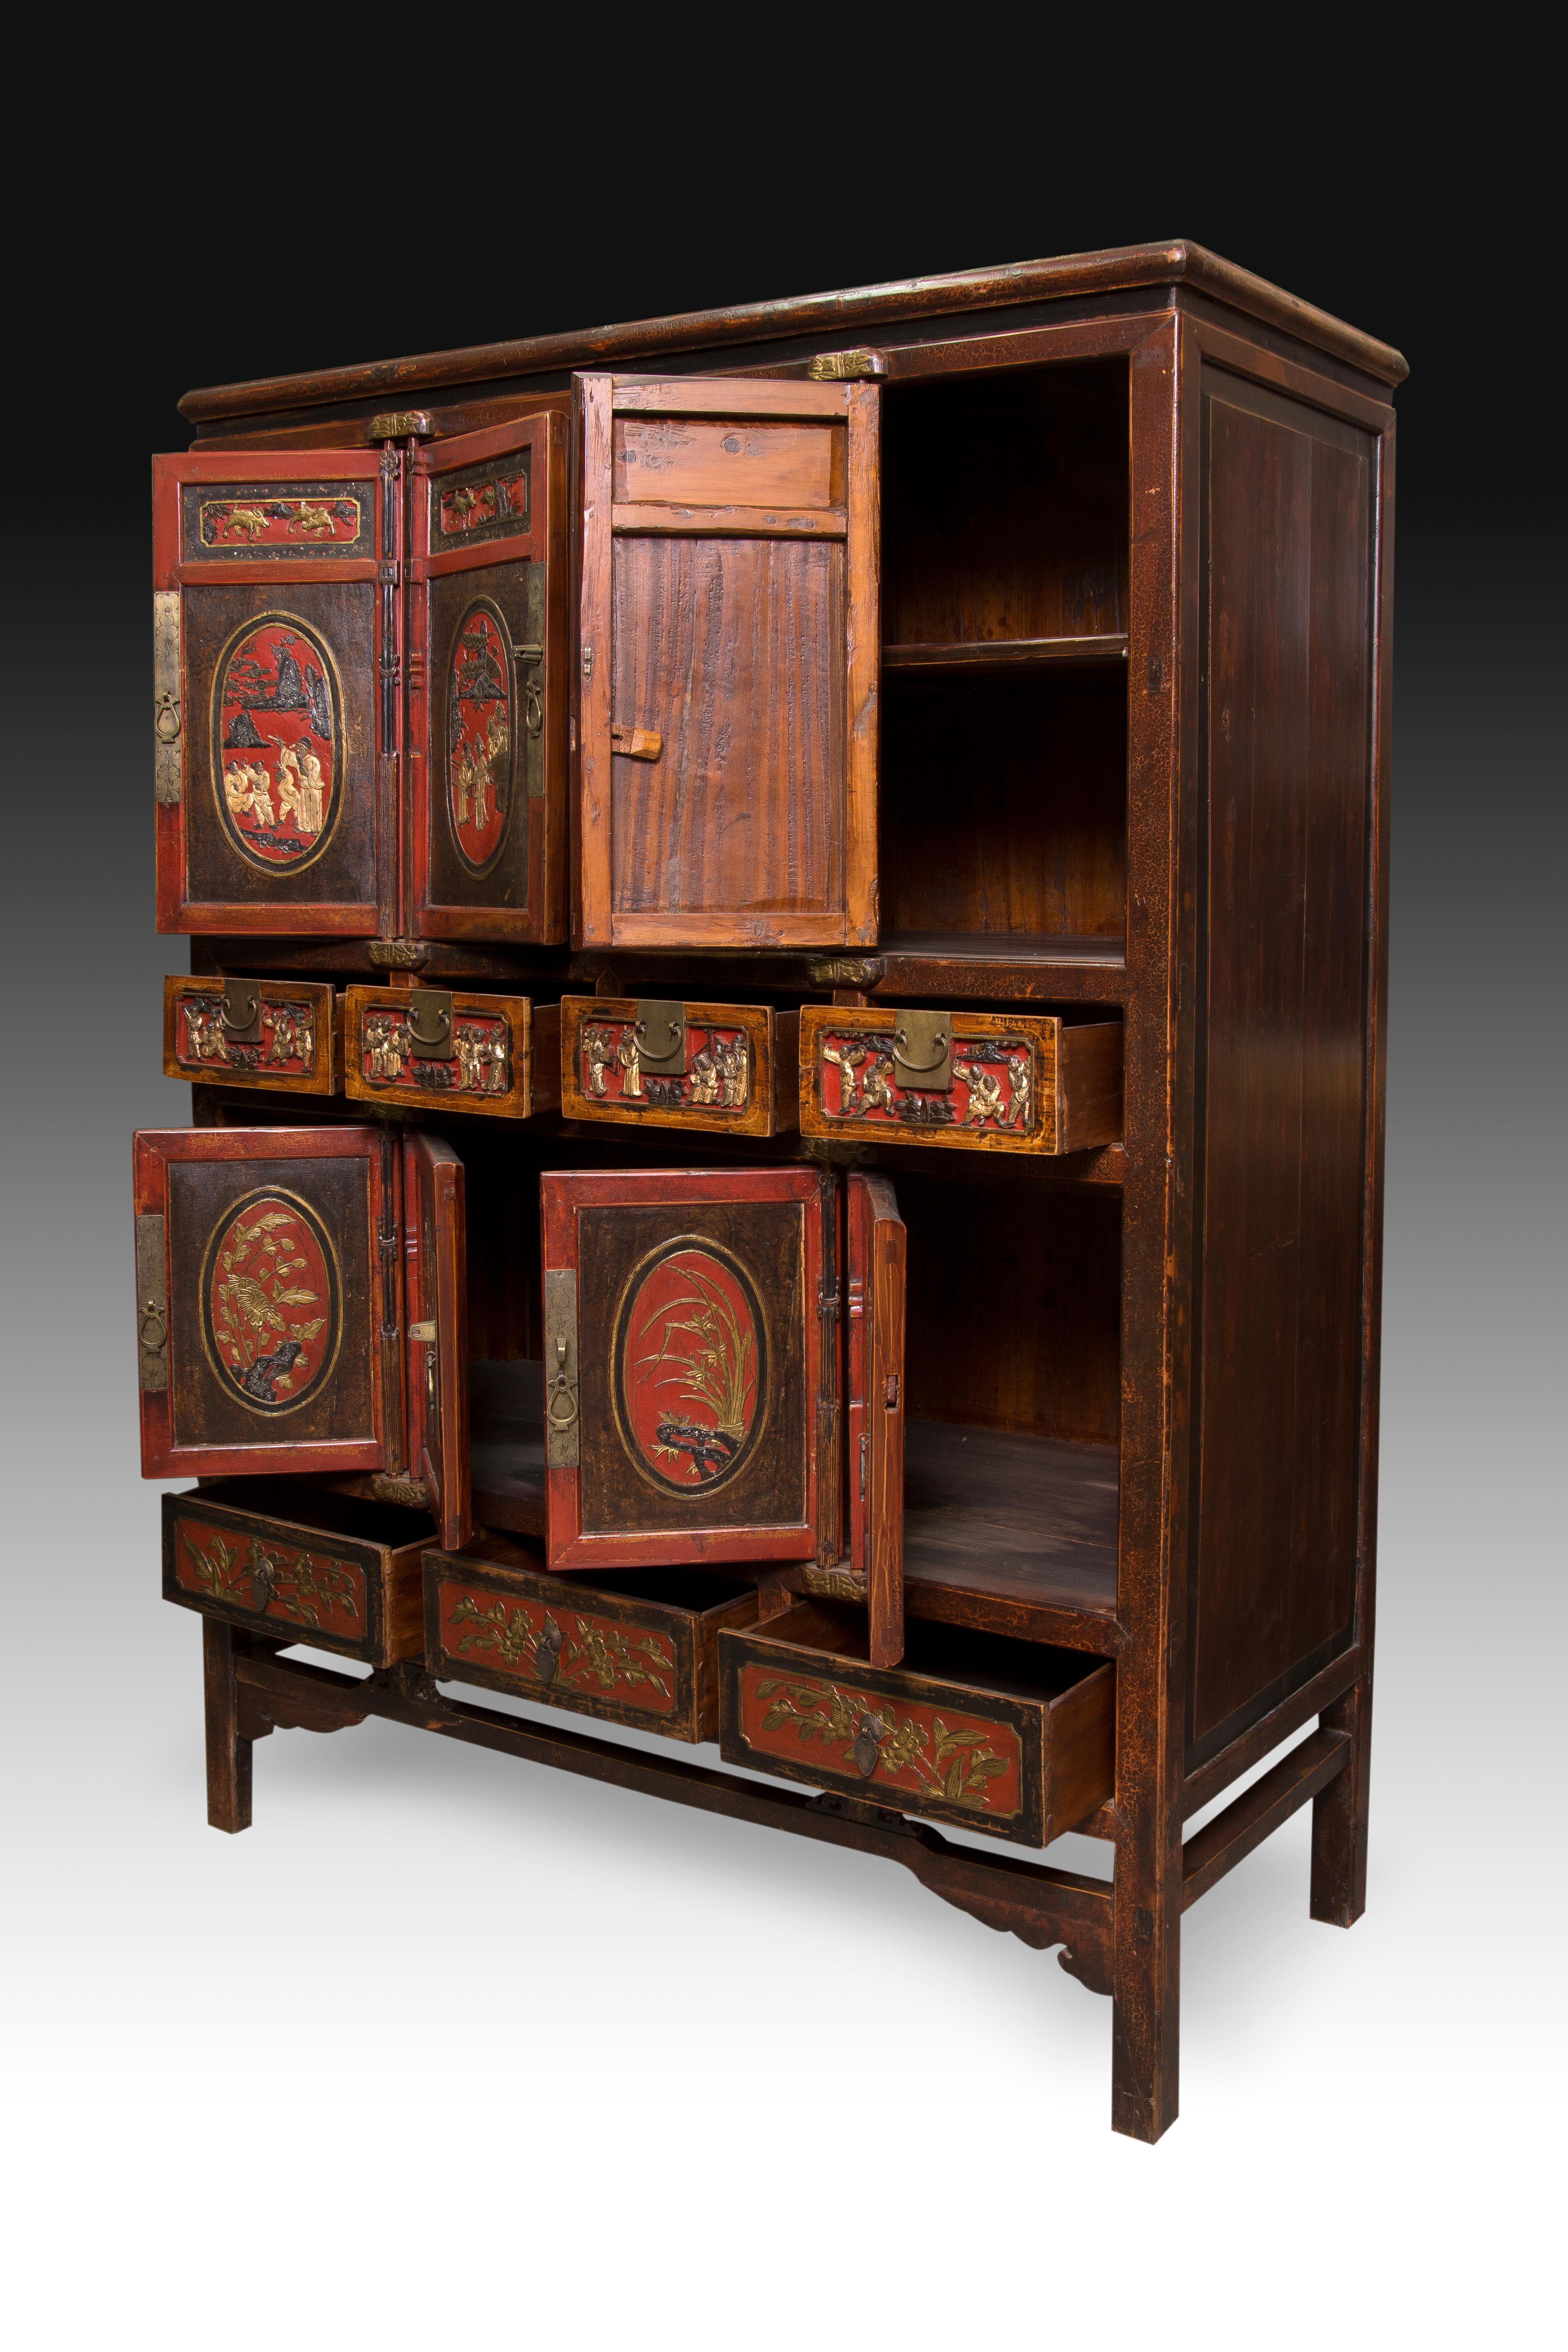 Asian Oriental Cabinet, Polychromed Wood and Metal, 19th-20th Century